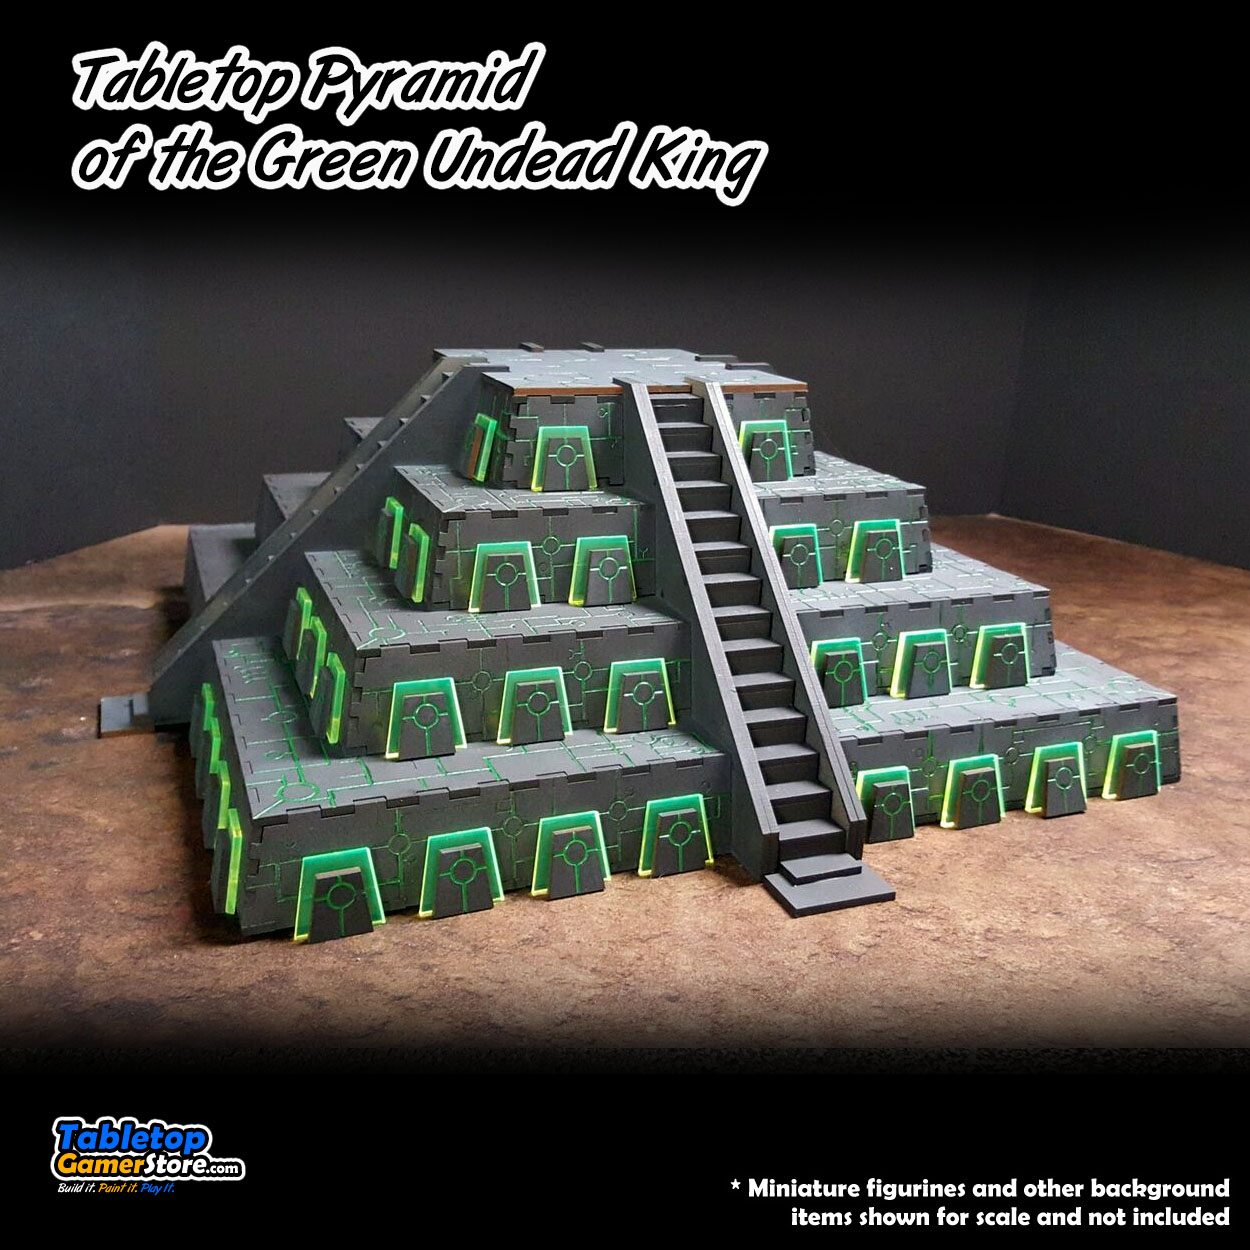 Tabletop Pyramid of the Green Undead King – Now Available!